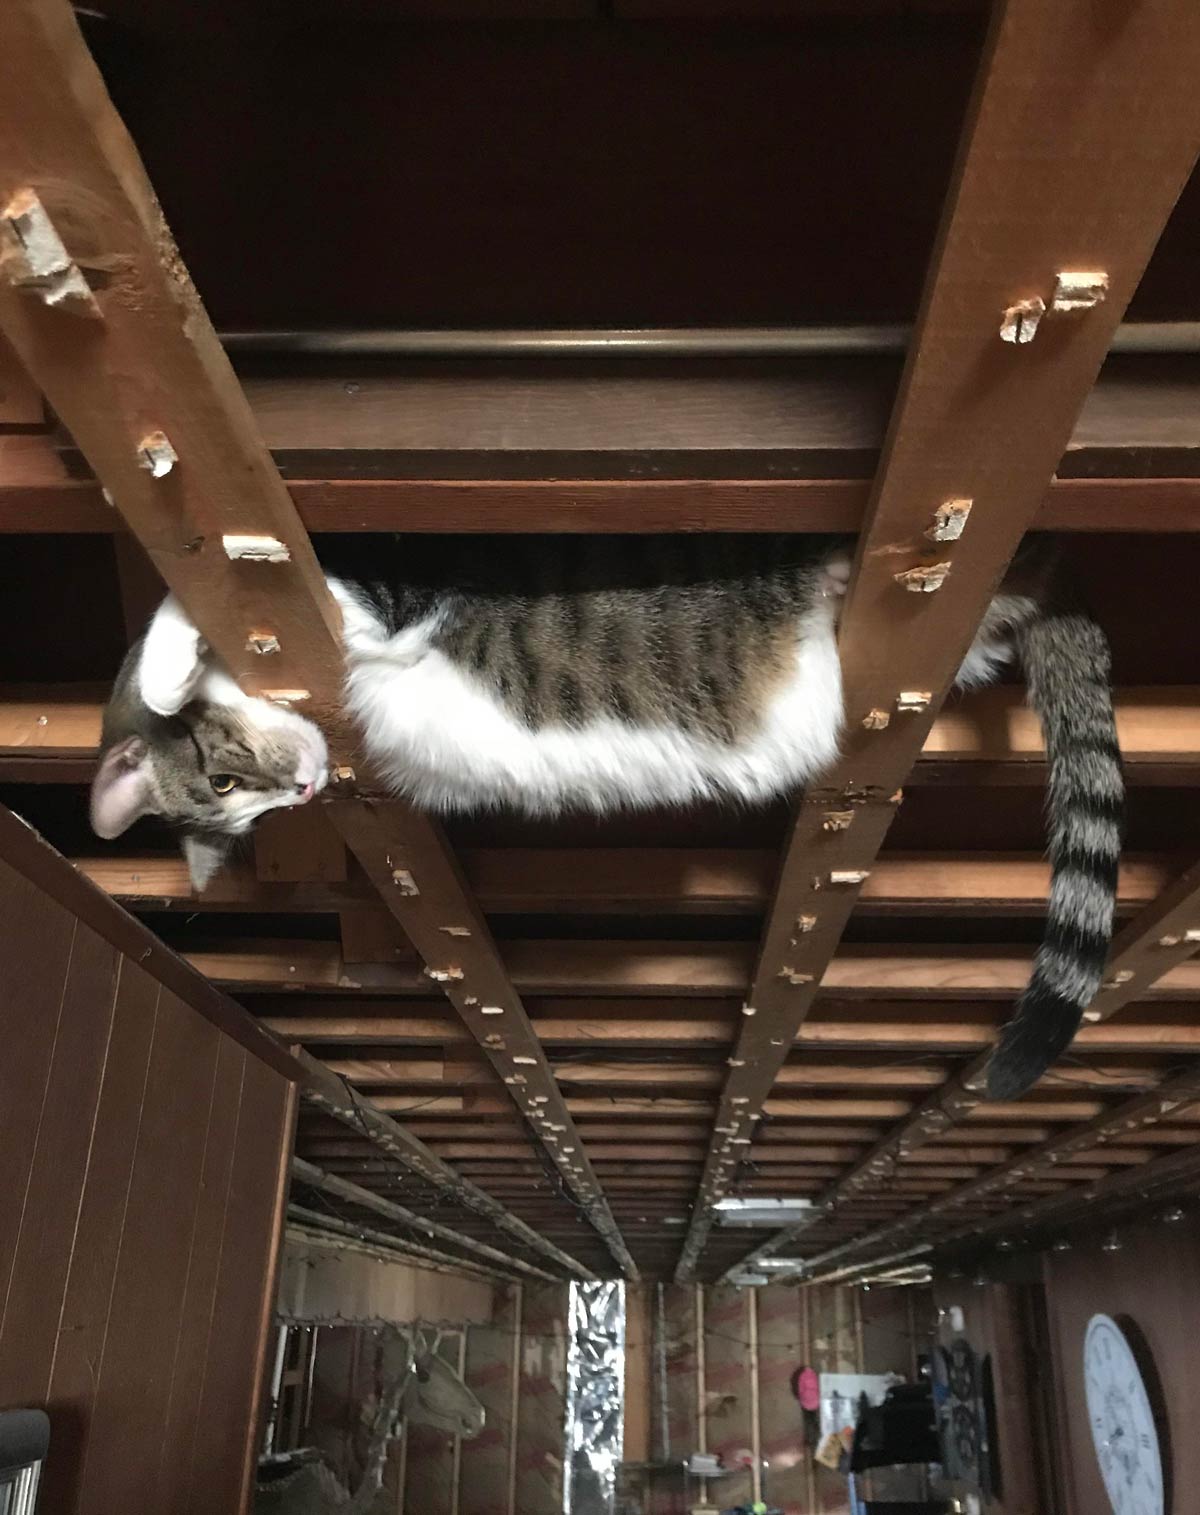 I’m remodeling my basement and all the ceiling tiles were just removed. I found my cat like this